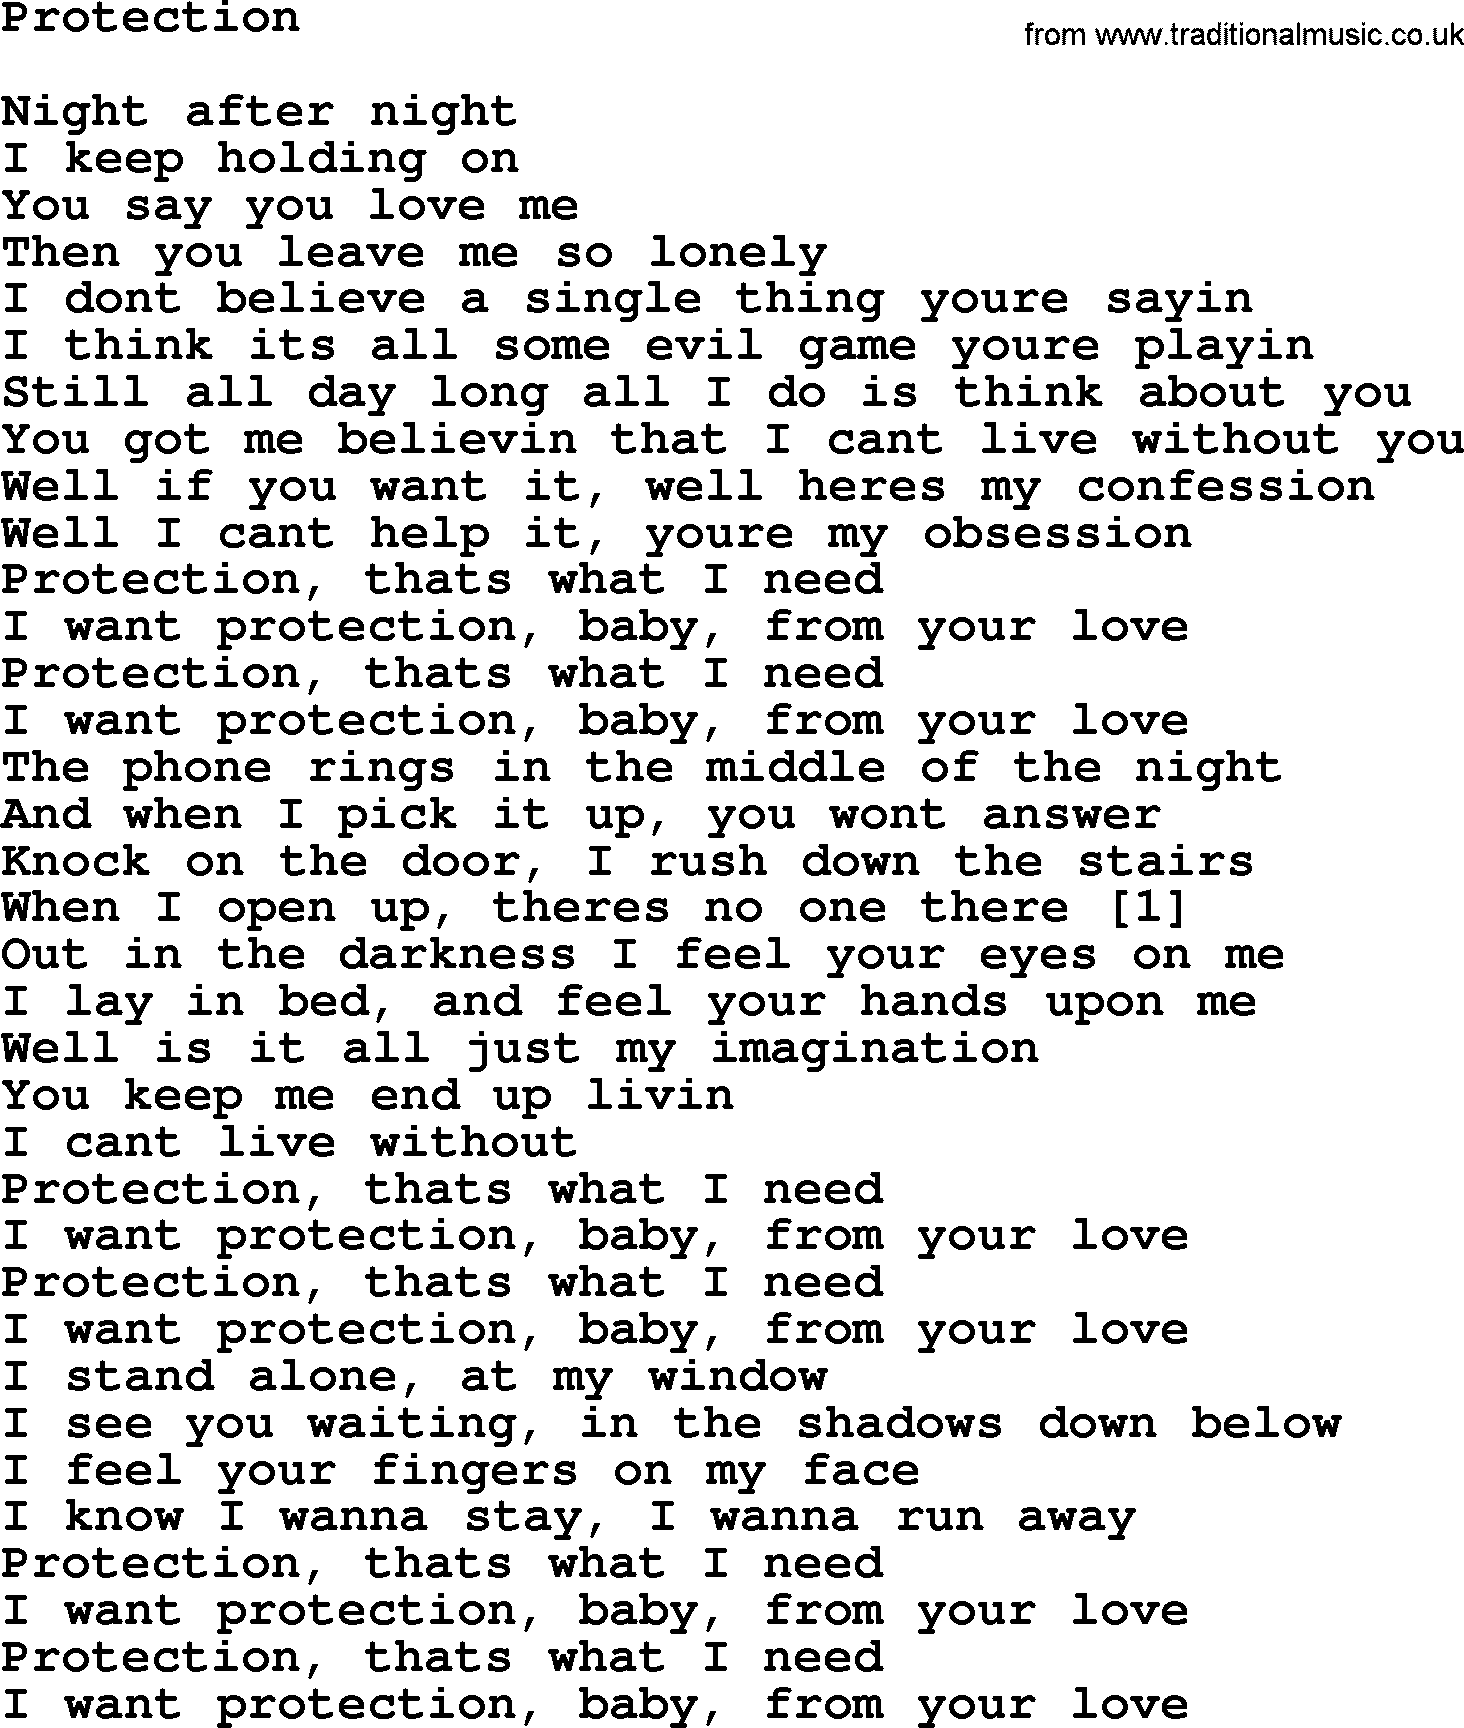 Bruce Springsteen song: Protection lyrics